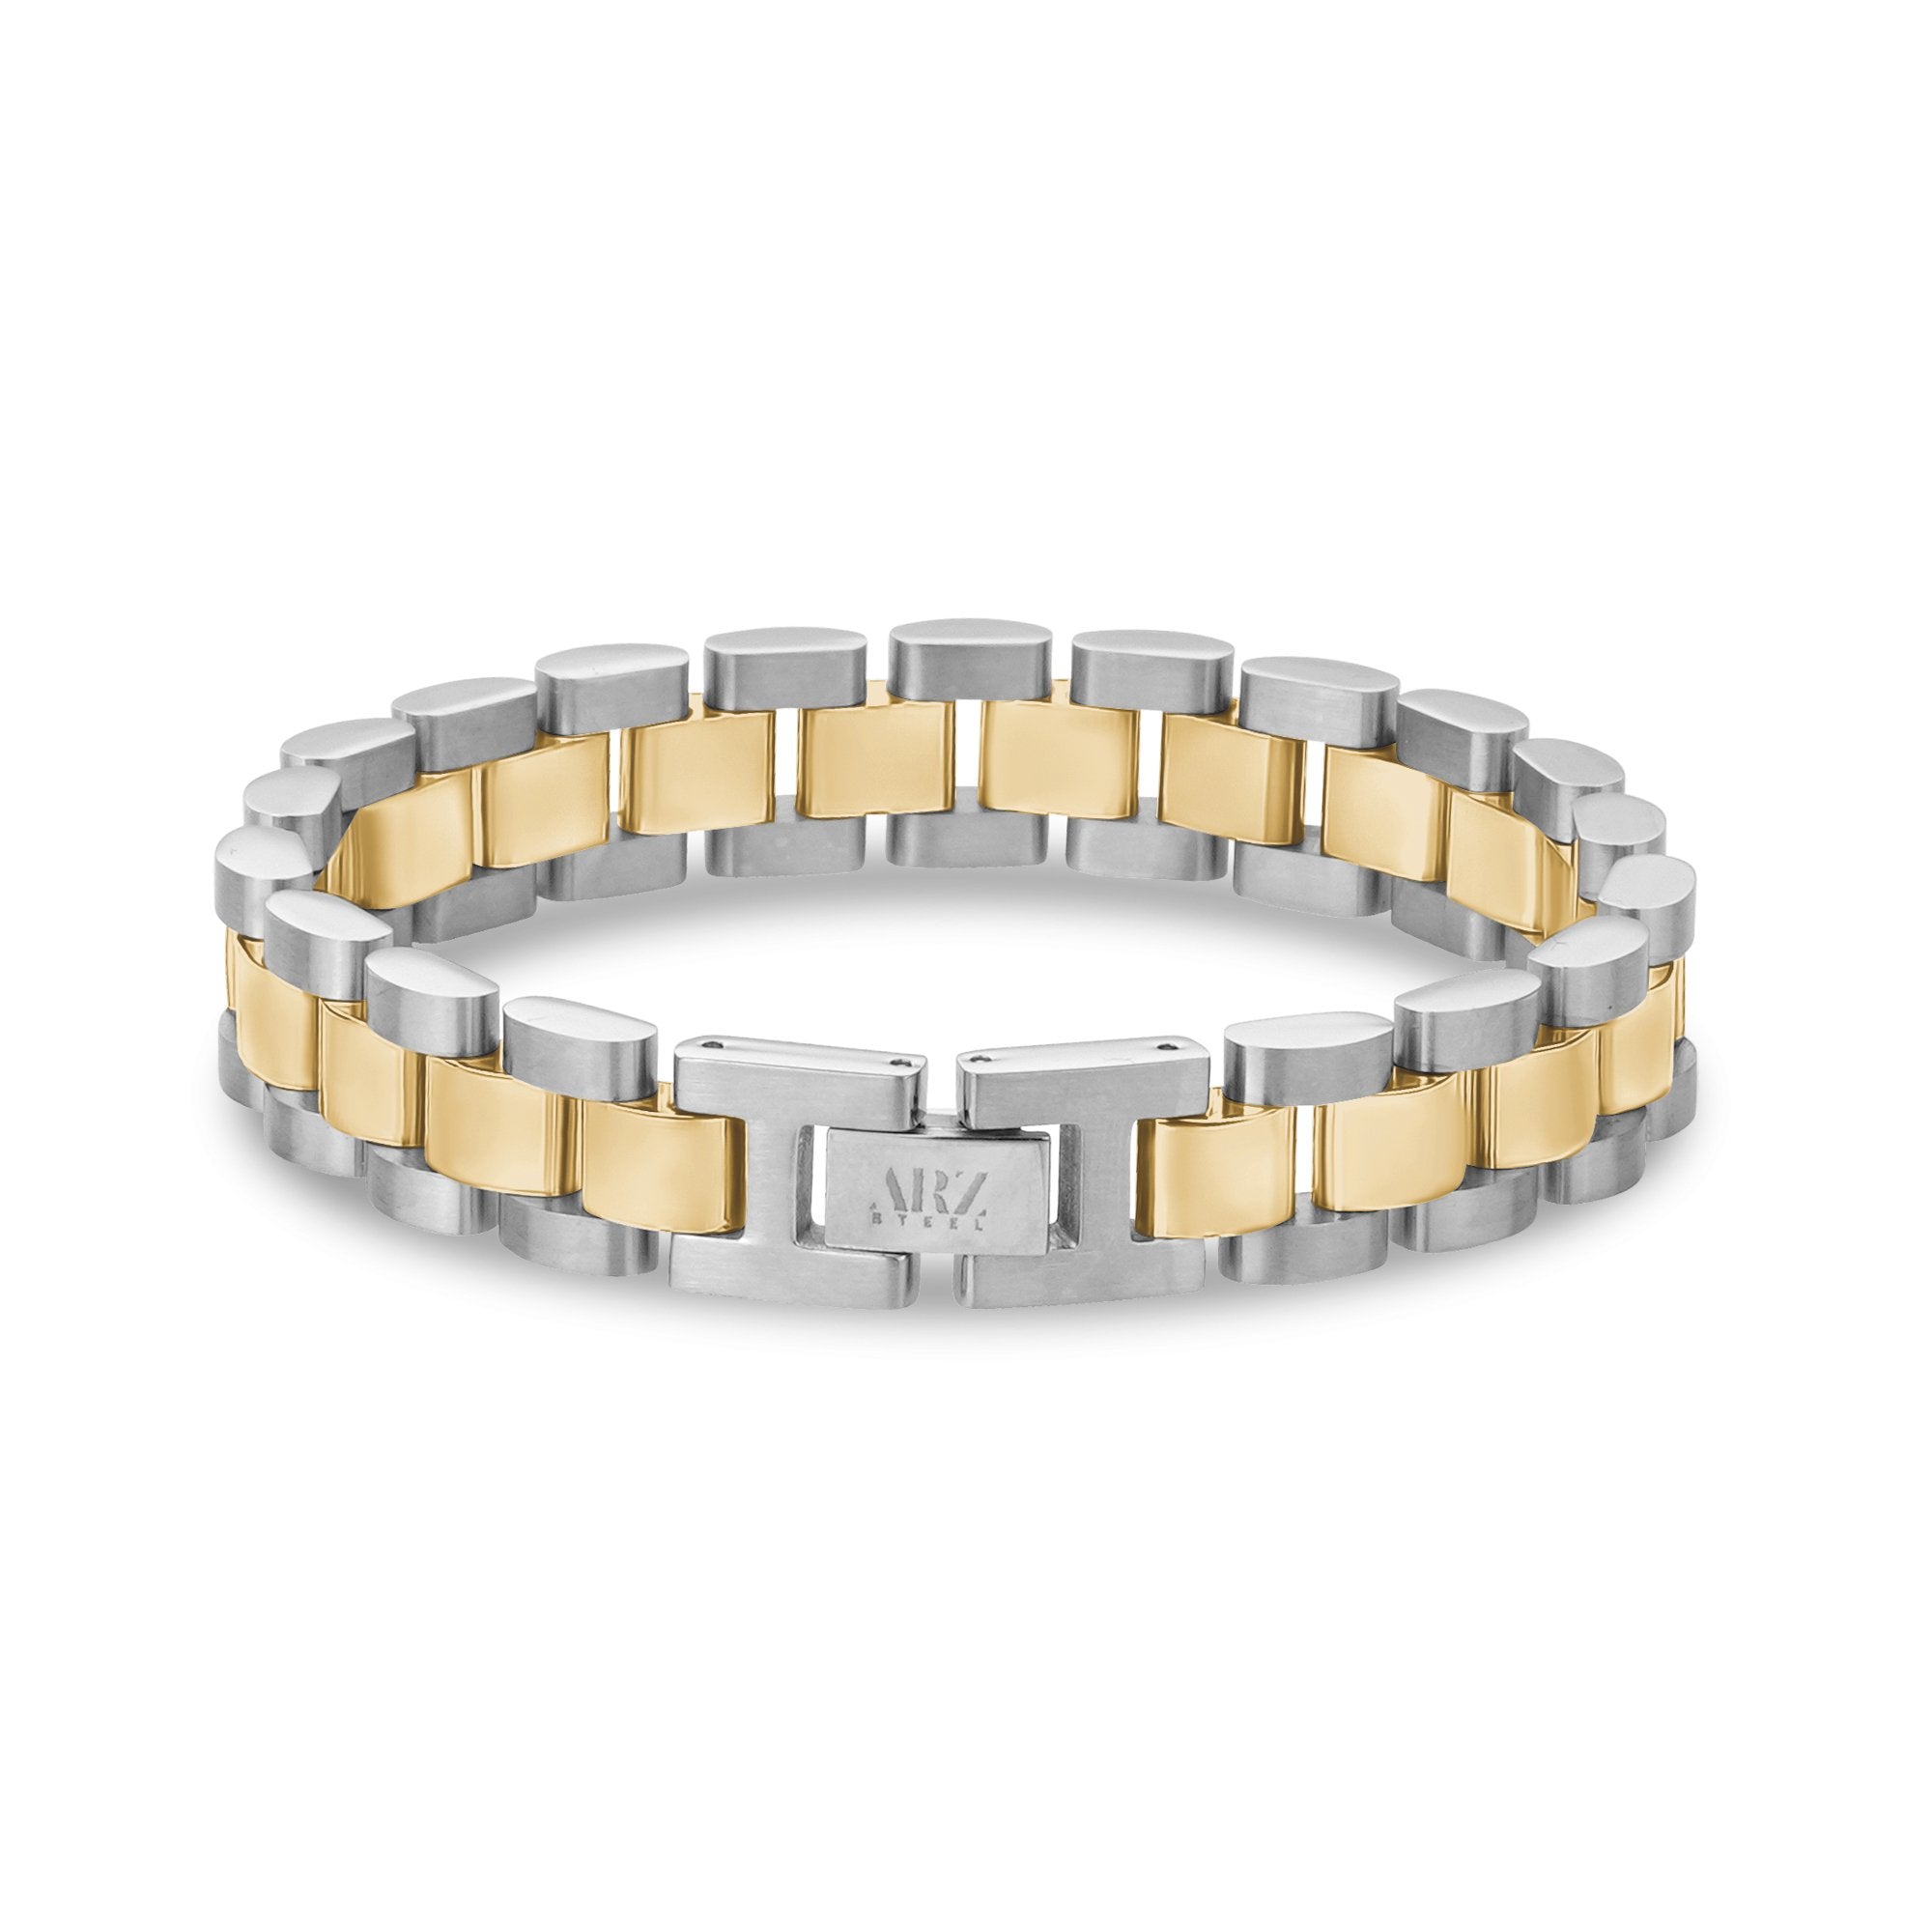 Lucia Watch Link Chain Bracelet – The Songbird Collection